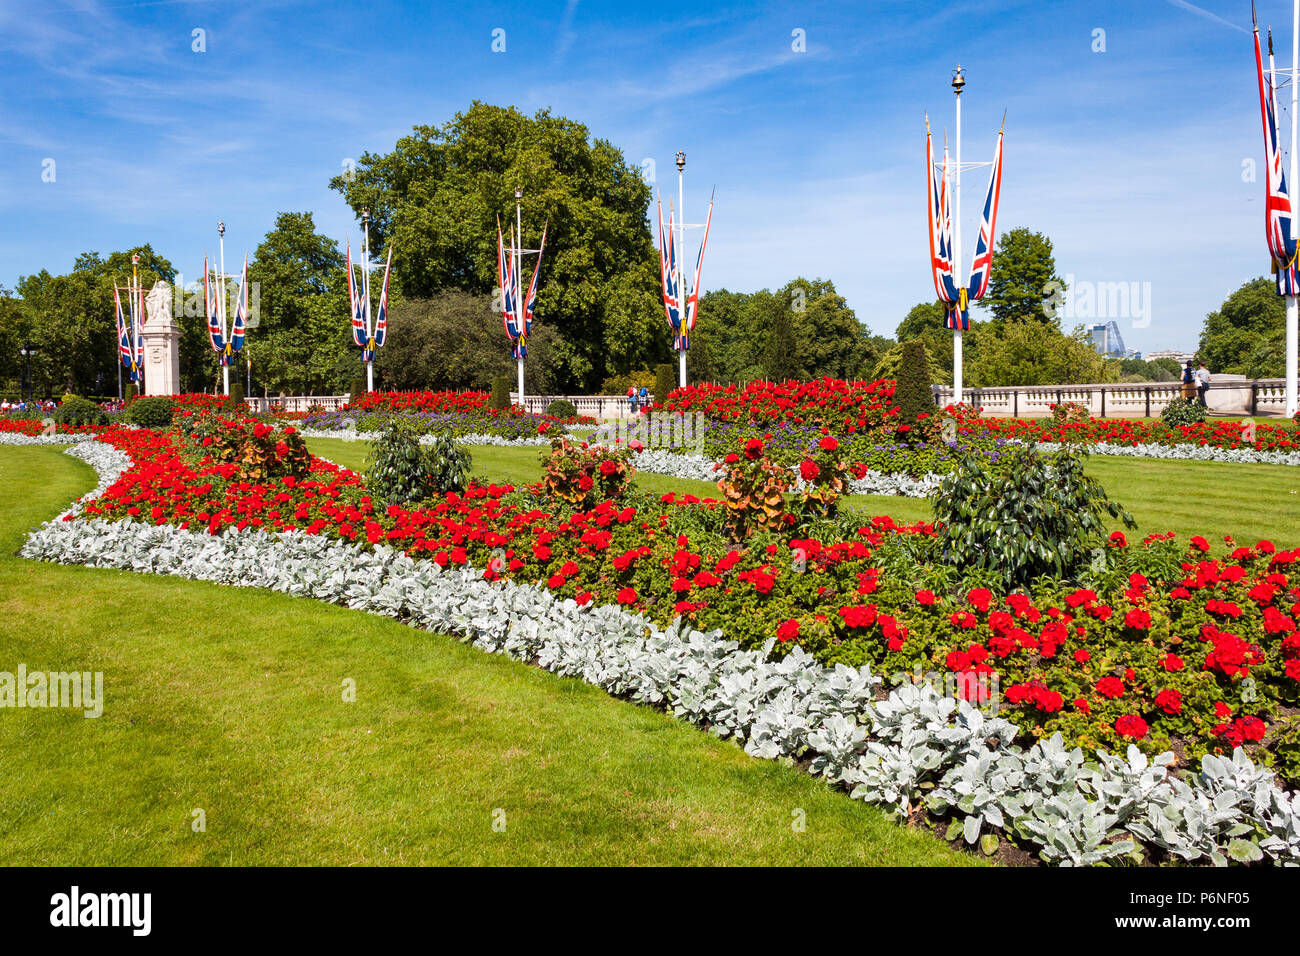 Flowerbed in in front of Buckingham Palace (London) Stock Photo